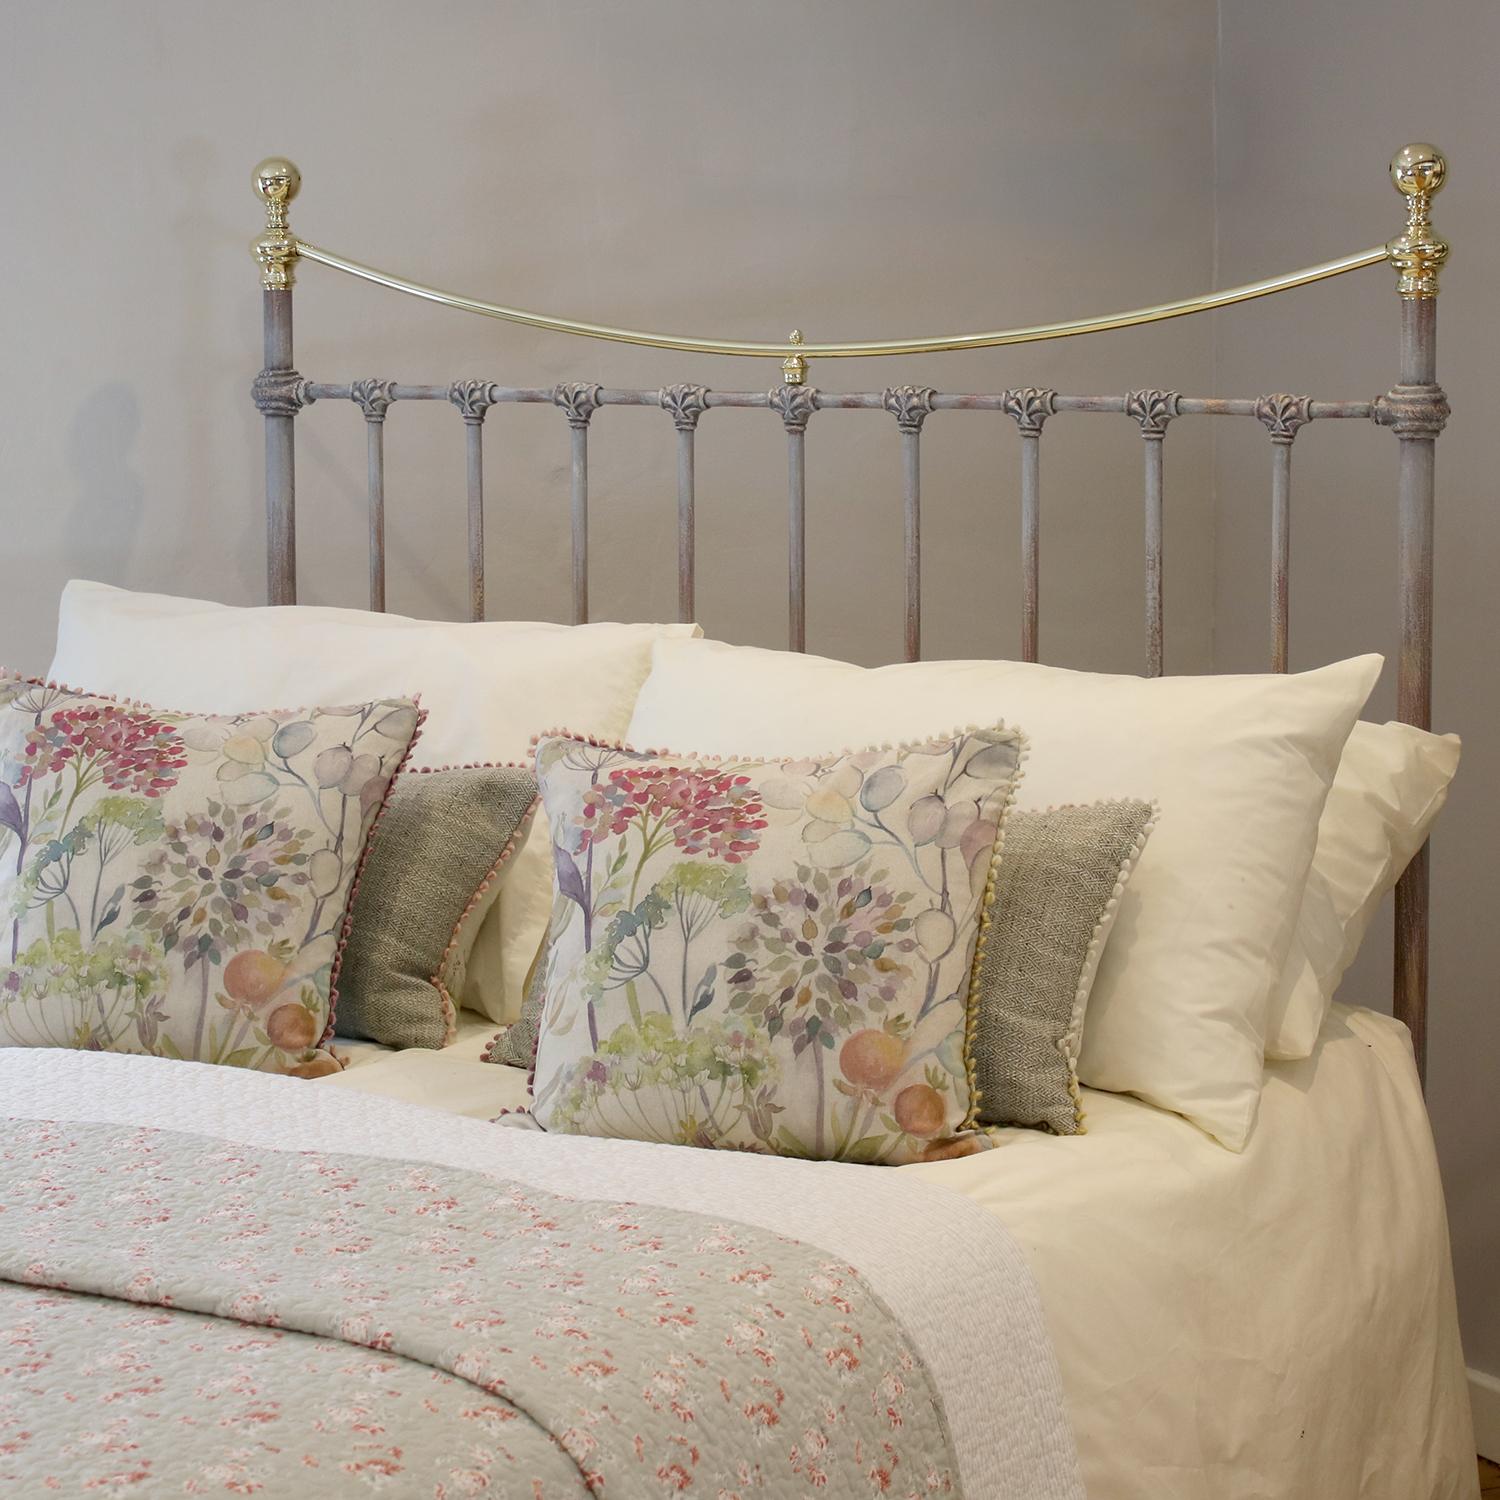 A platform brass and cast iron low end bed sympathetically adapted from an original frame. This bed has brass knobs and curved top rail finished in our hand painted finish.

The bed accepts a double size, 4ft 6in wide, base and mattress